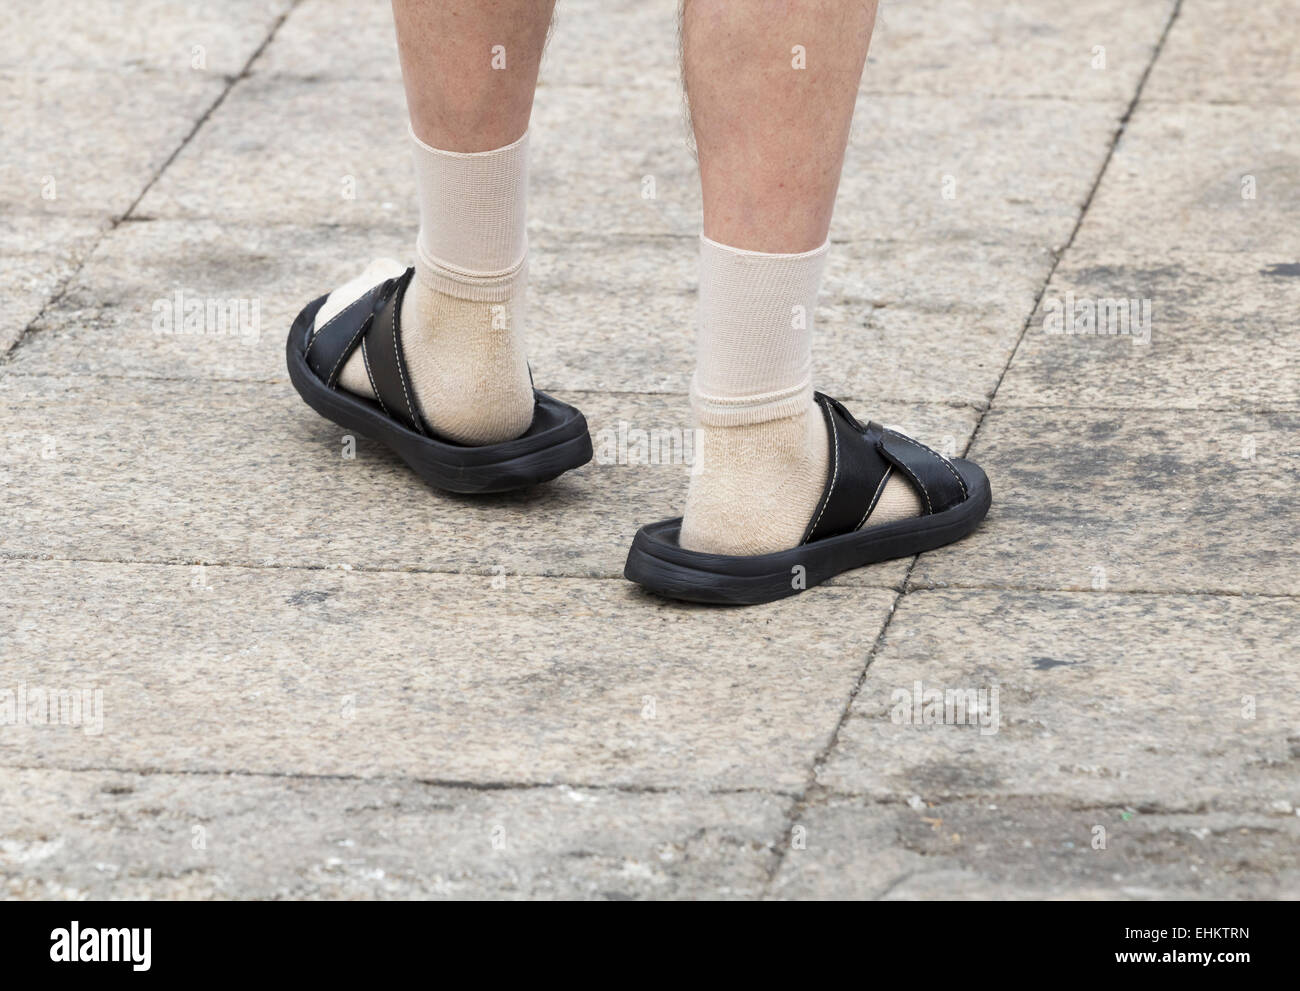 Man wearing socks and sandals on holiday. Stock Photo